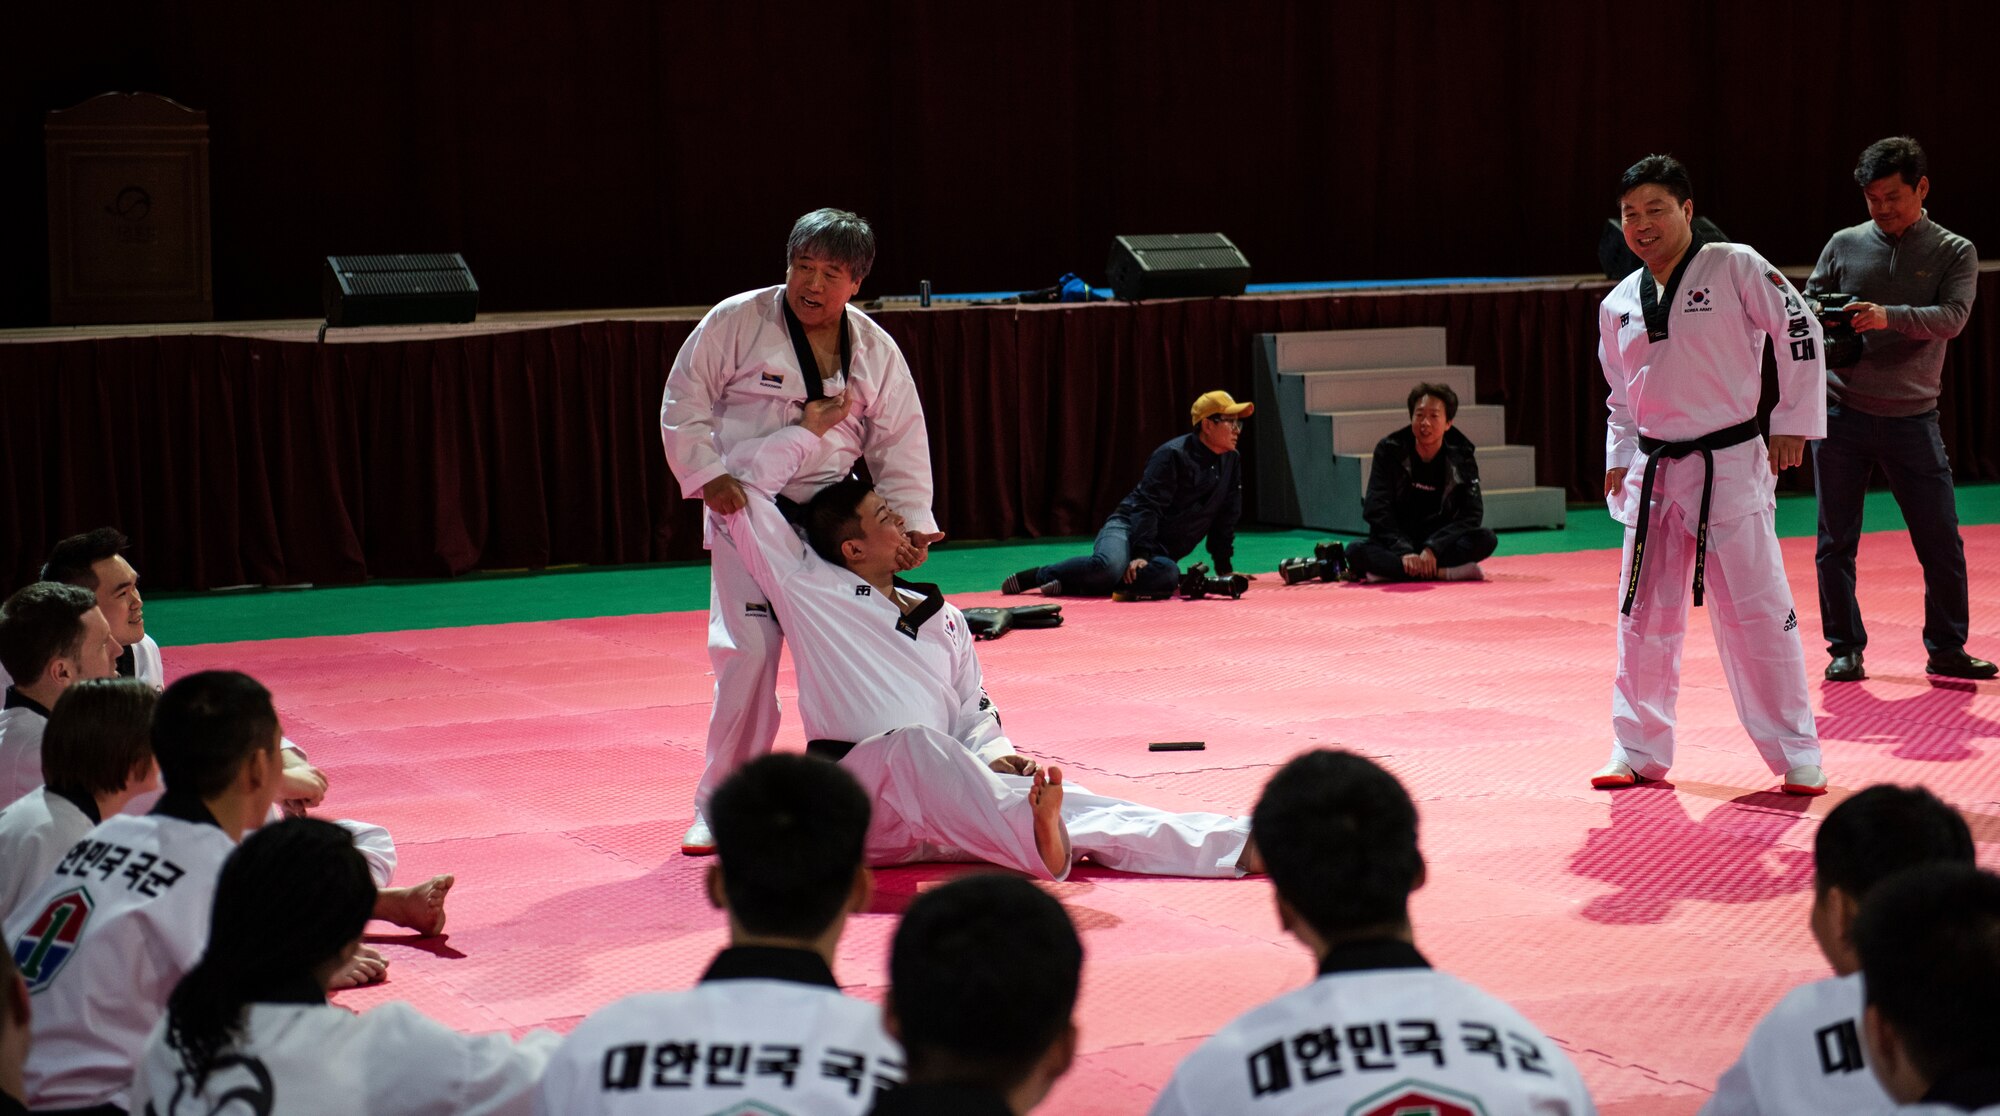 Members from the United States Forces-Korea, learn self defense techniques with Republic of Korea Army soldiers during a Korean Ministry of Defense tour at Muju, Republic of Korea, April 9, 2019. The MND has been organizing and hosting tours for U.S. service members since 1972, giving them opportunities to learn about Korean history and culture. (U.S. Air Force photo by Senior Airman Stefan Alvarez)